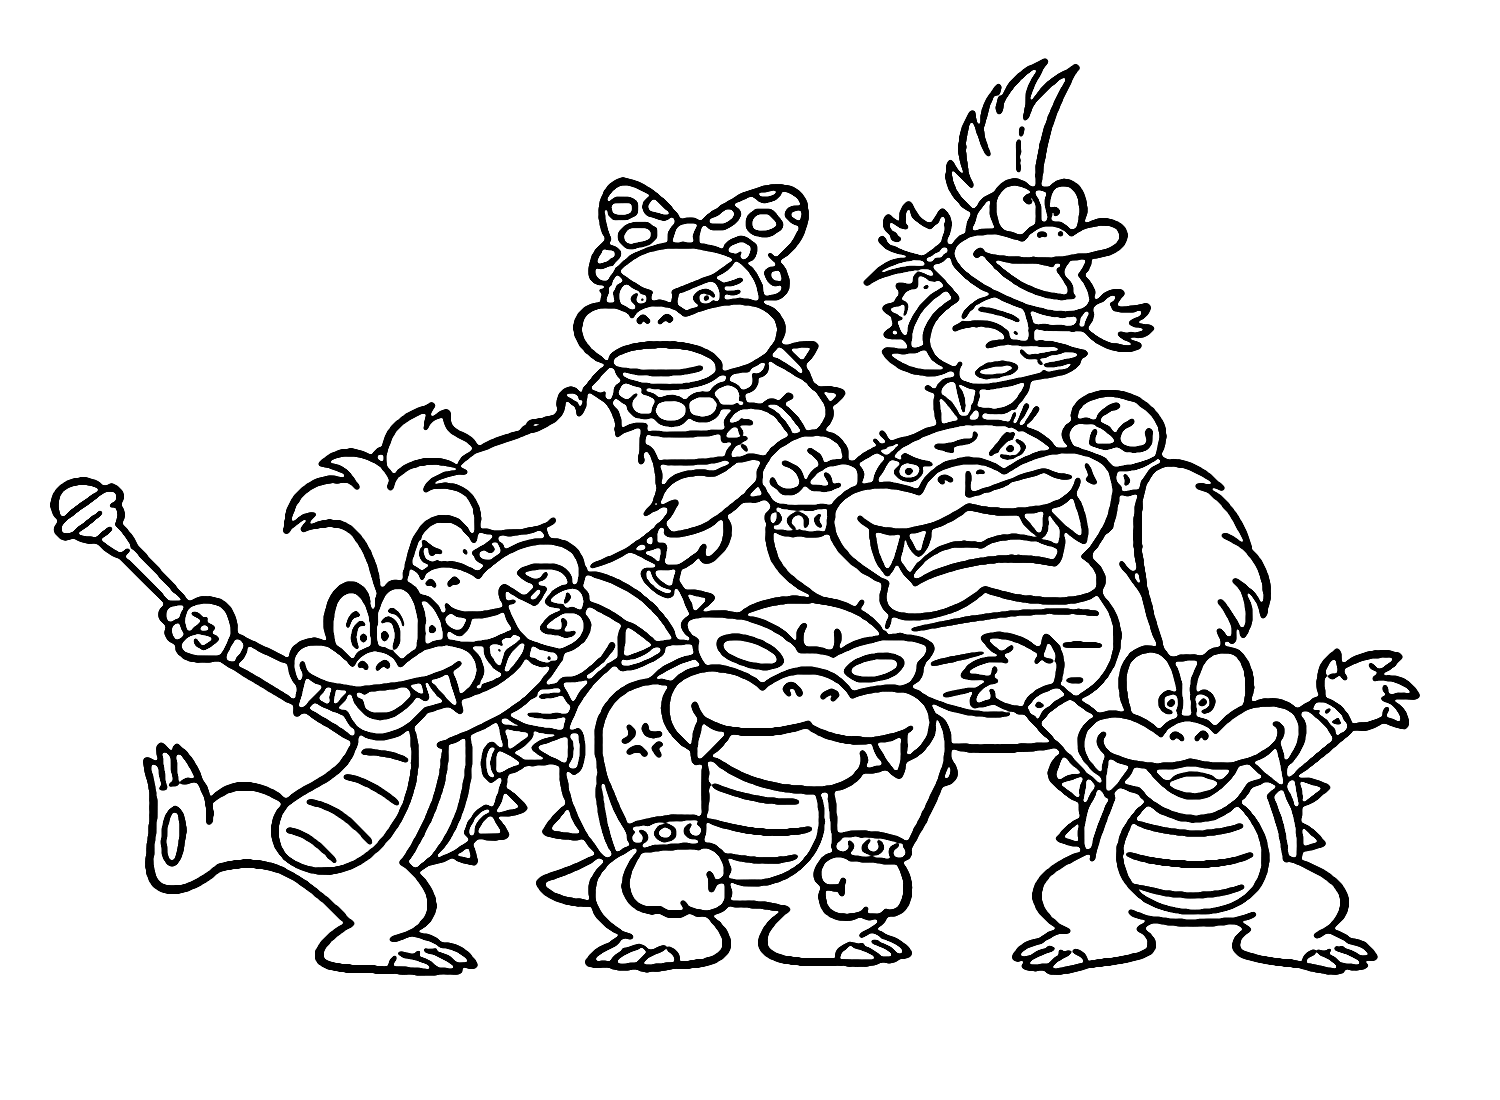 Lemmy koopa mario coloring page